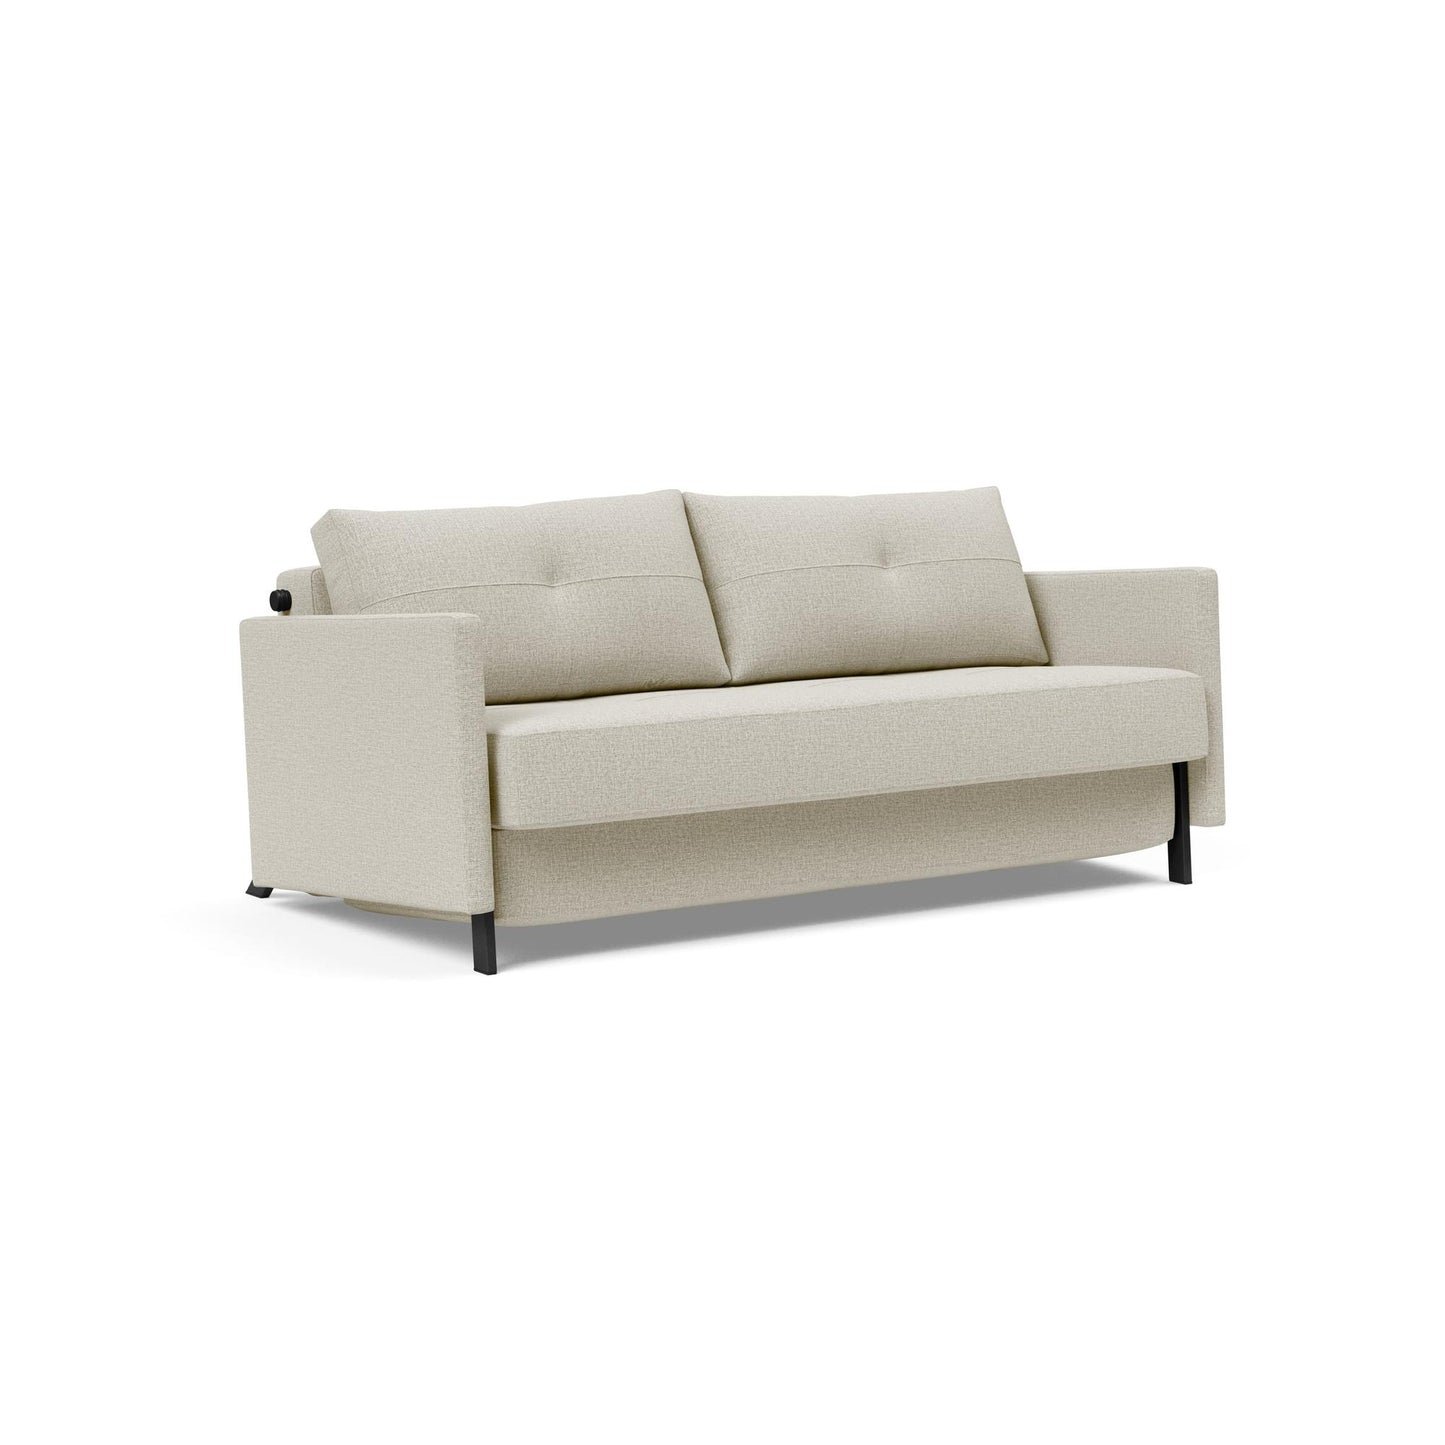 Cubed Deluxe Queen Sofa Bed w/Arms in Mixed Dance Natural